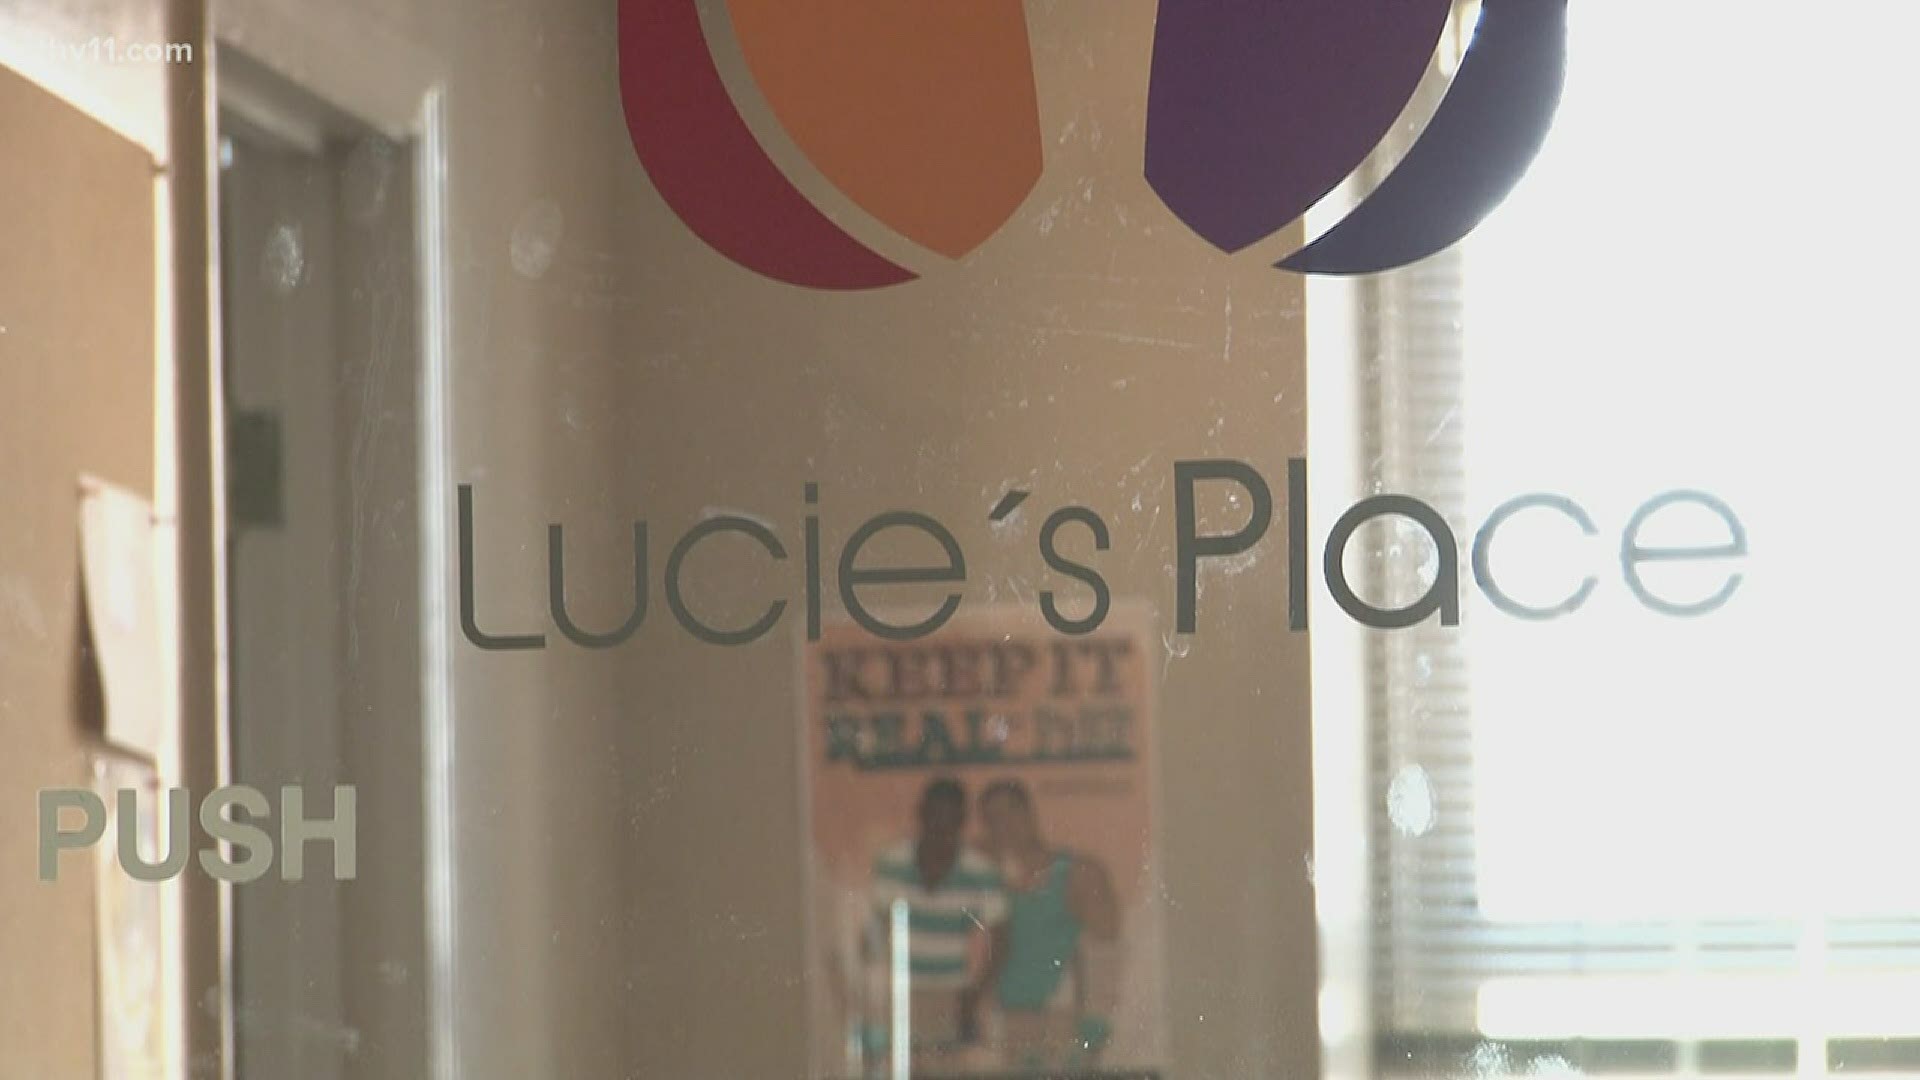 One of the most recognized LGBT shelters in Central Arkansas made some big changes this past week, but it's the reason for the changes that is rocking the community.